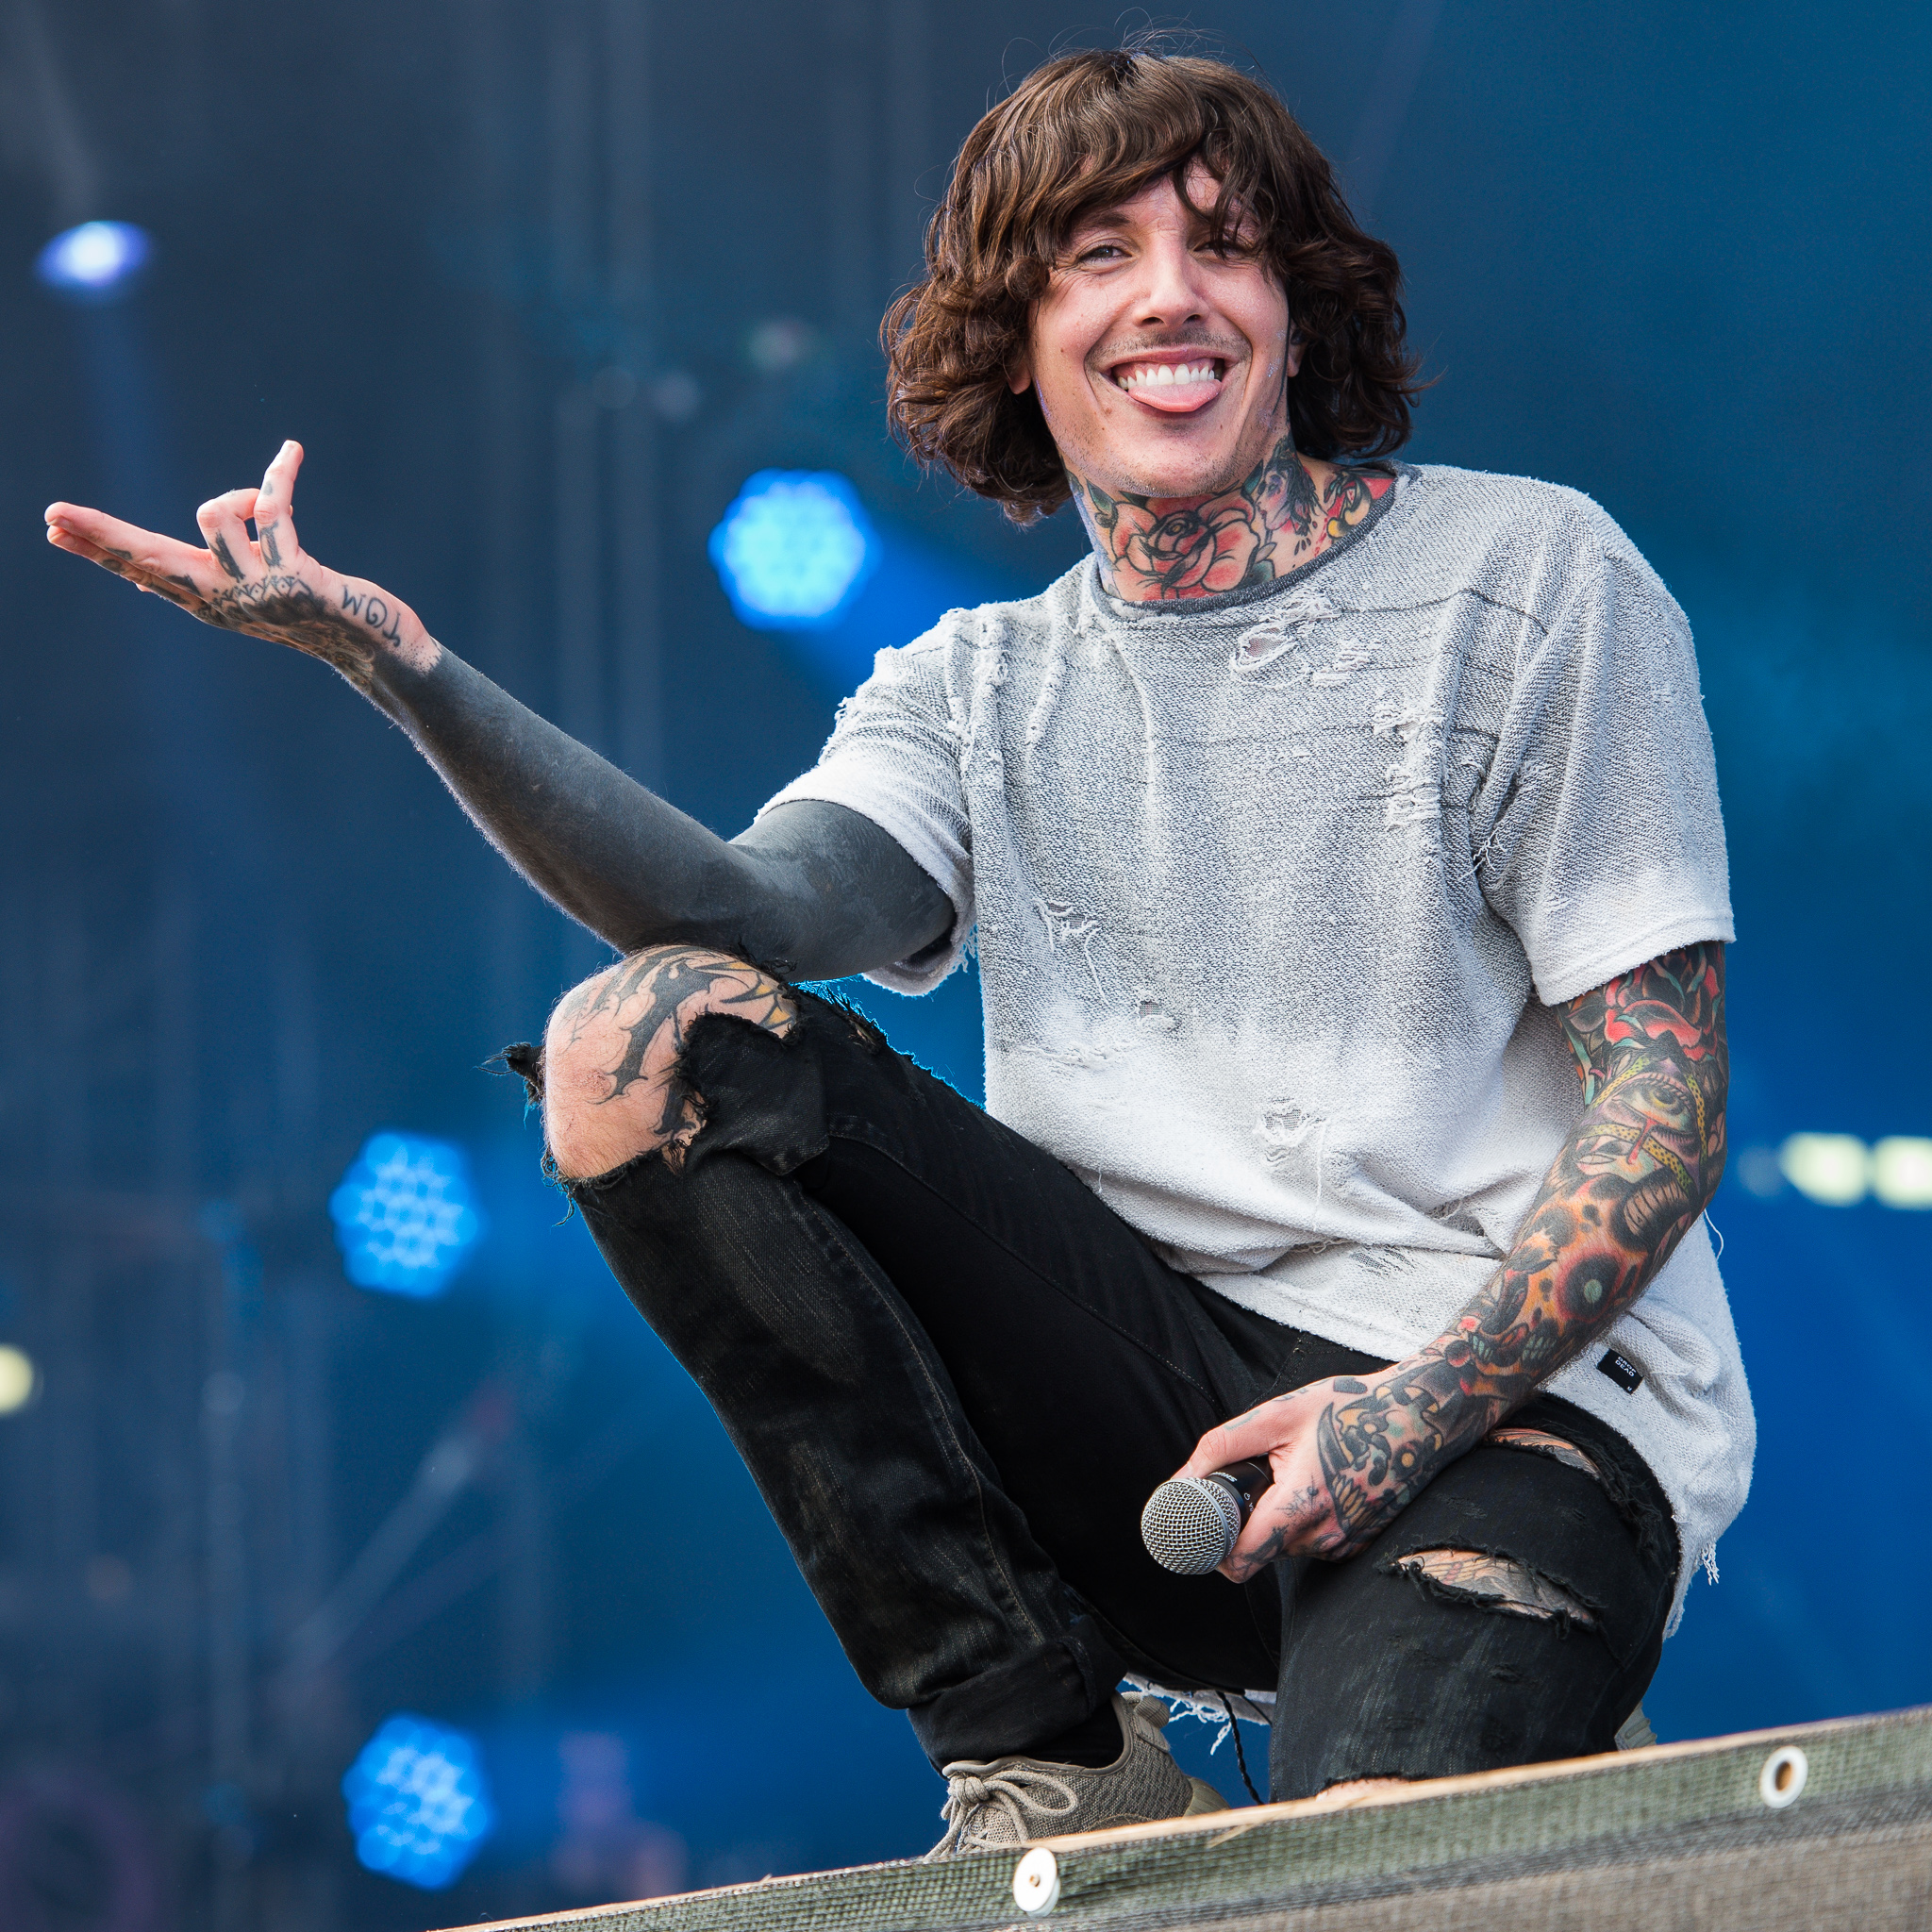 Oli Sykes: Most Up-to-Date Encyclopedia, News & Reviews